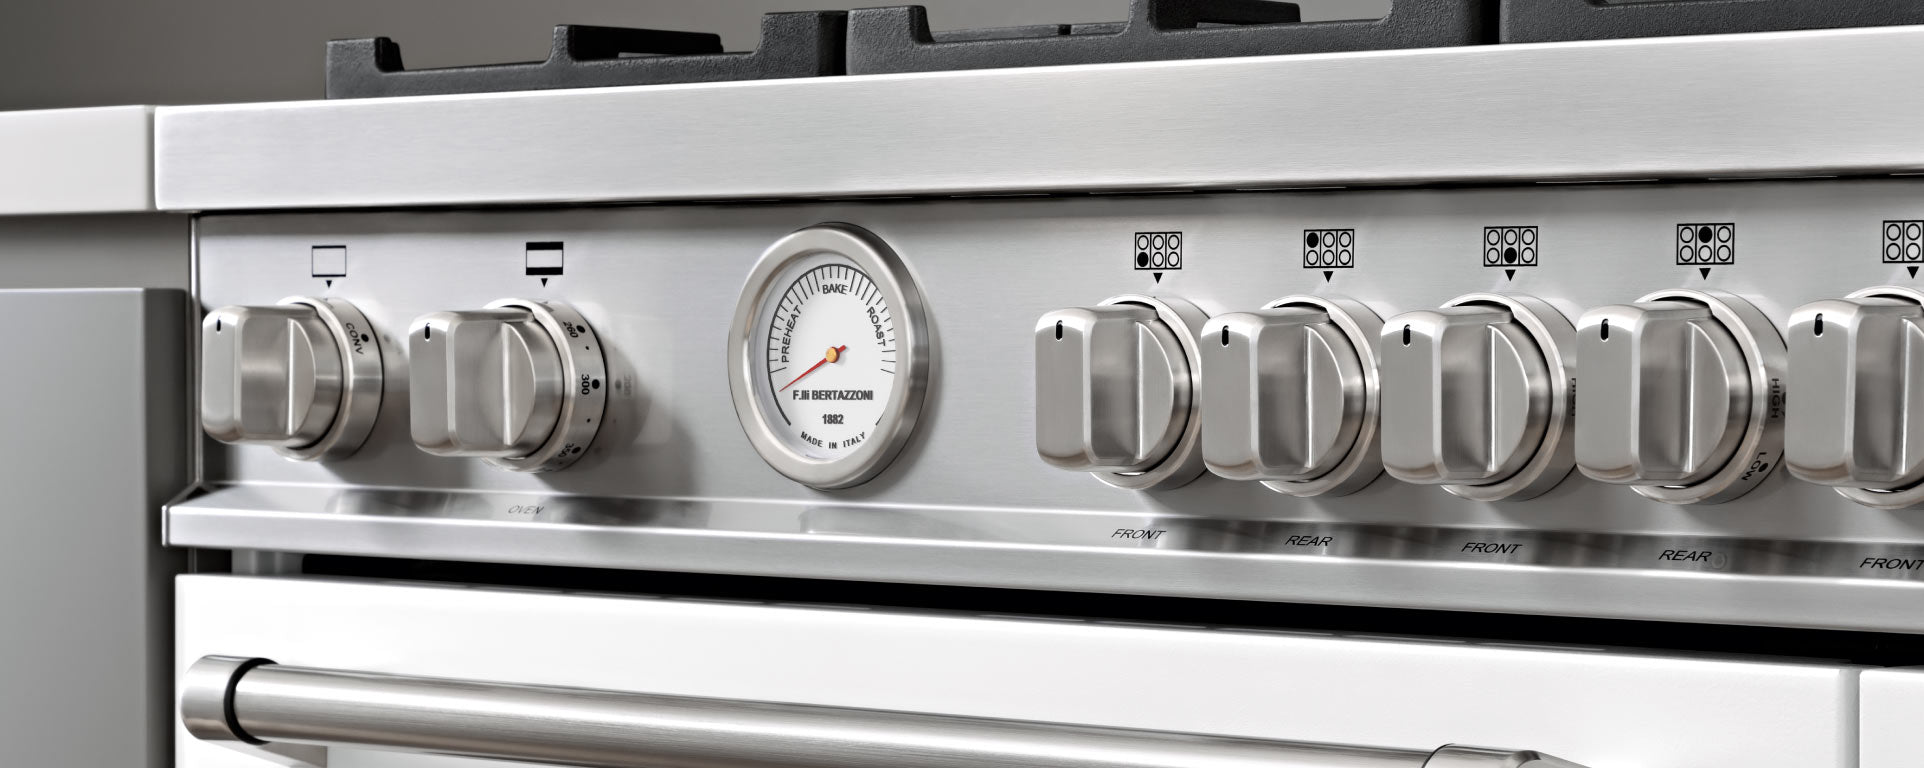 Bertazzoni Master Series 30" 5 Aluminum Burners Stainless Steel Freestanding Propane Gas Range With 4.7 Cu.Ft. Electric Oven